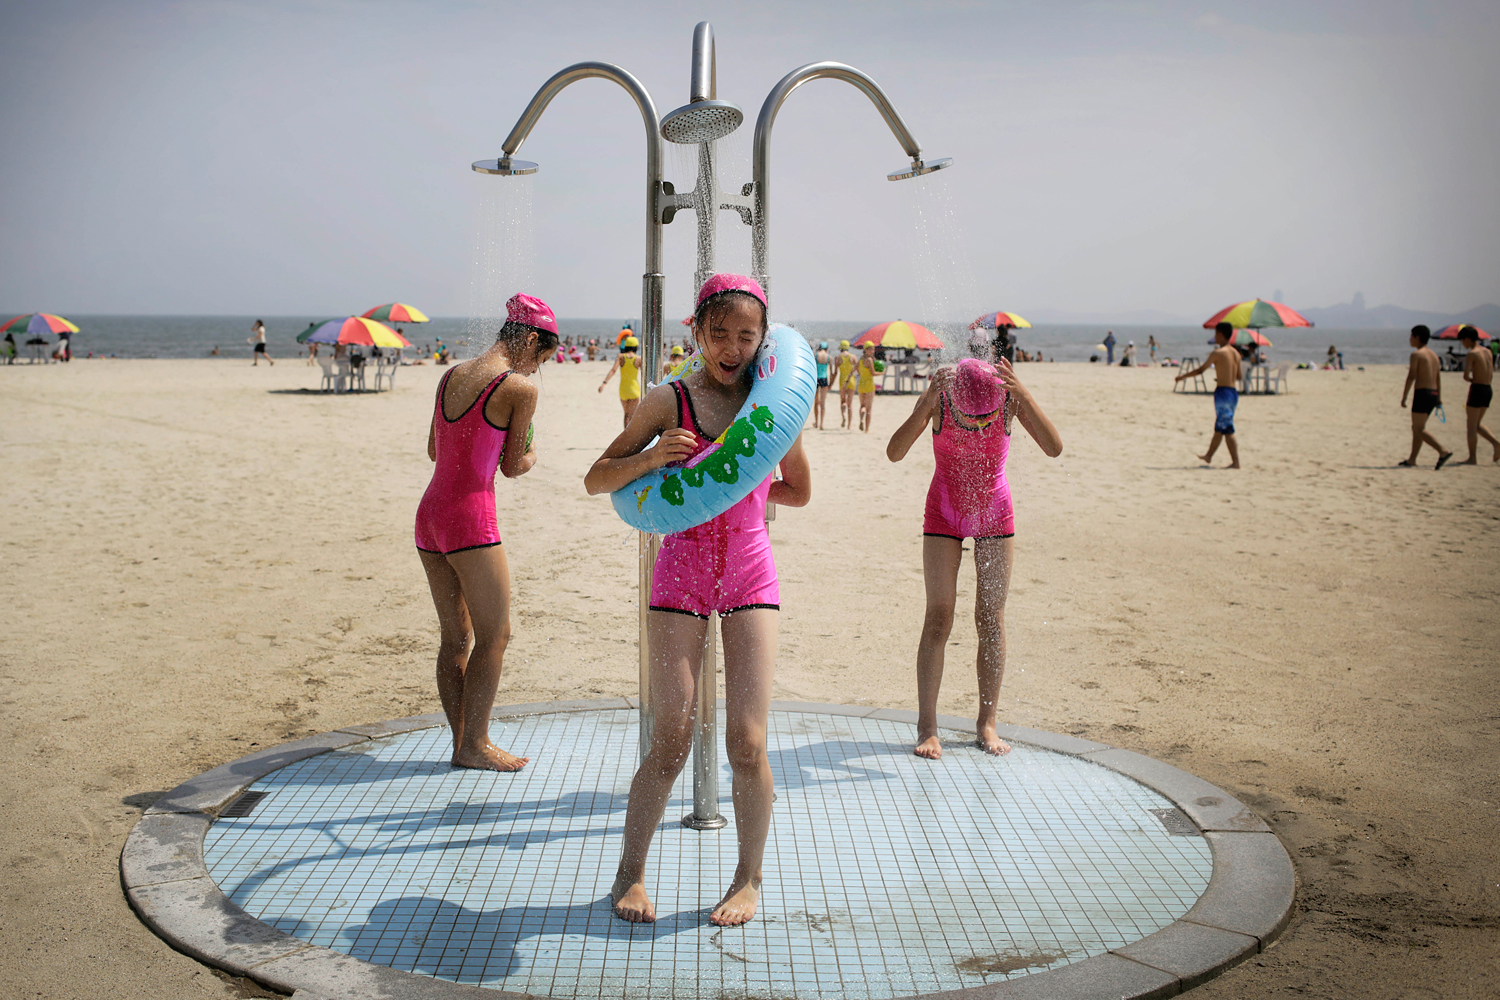 North Korean girls in similar bathing suits stand under a shower at the Songdowon International Children's Camp, Tuesday, July 29, 2014, in Wonsan, North Korea. (Wong Maye-E –AP)